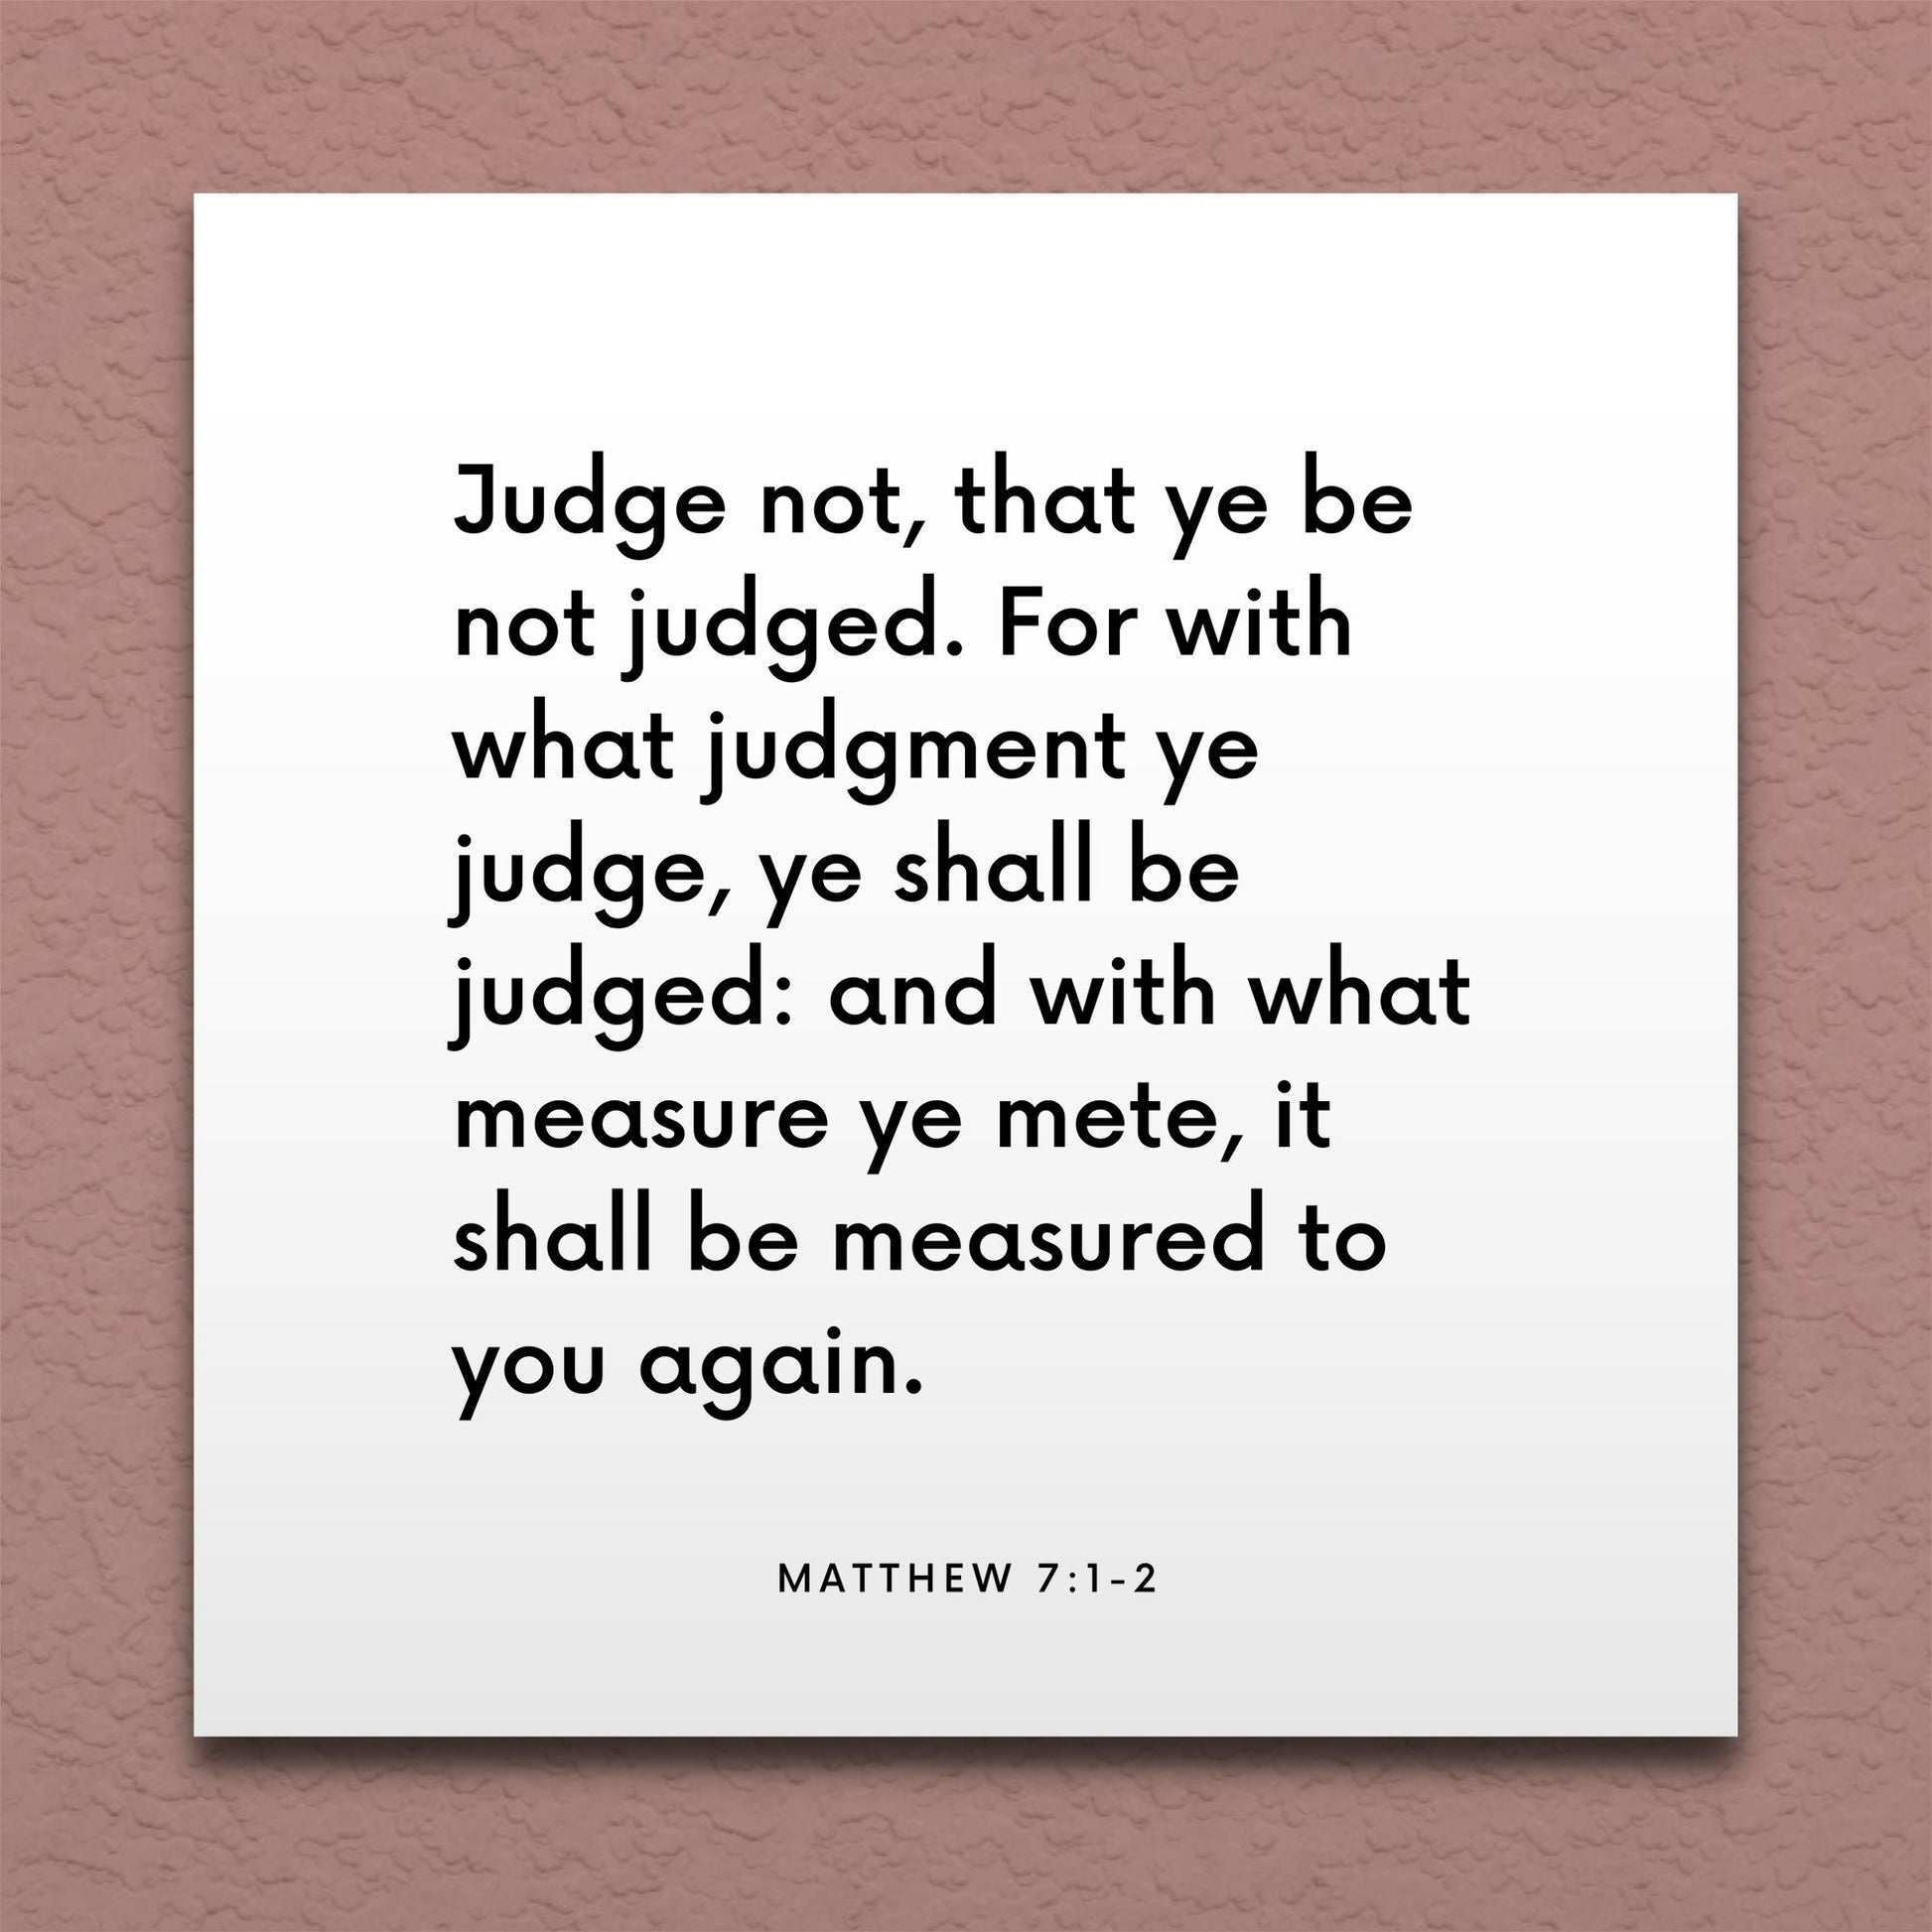 Wall-mounted scripture tile for Matthew 7:1-2 - "Judge not, that ye be not judged"